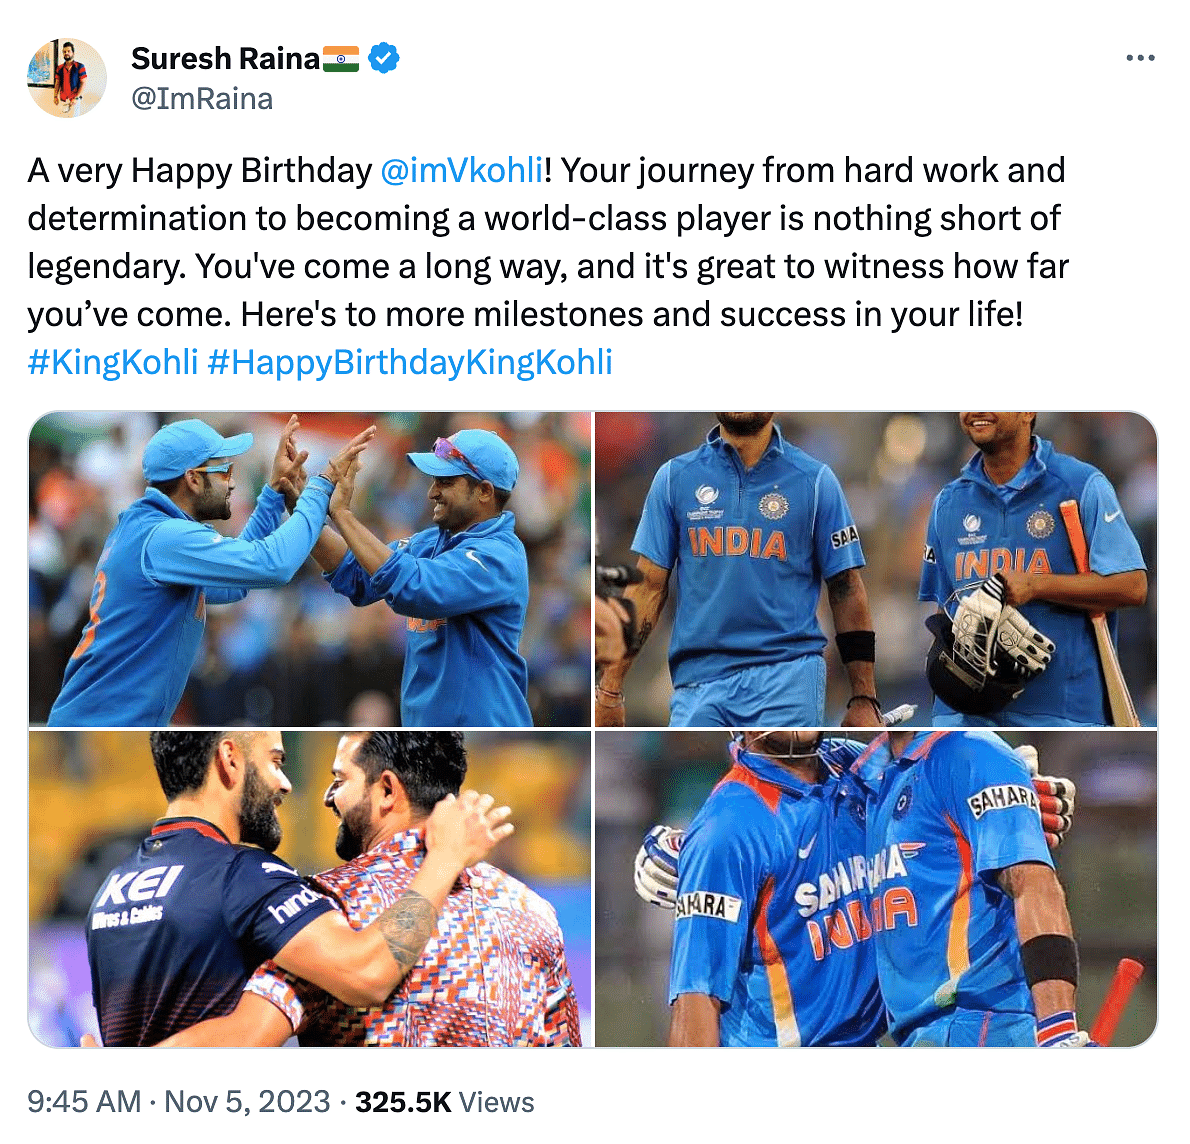 As Virat Kohli turns 35, teammates and members of the cricket fraternity take to social media to wish him.